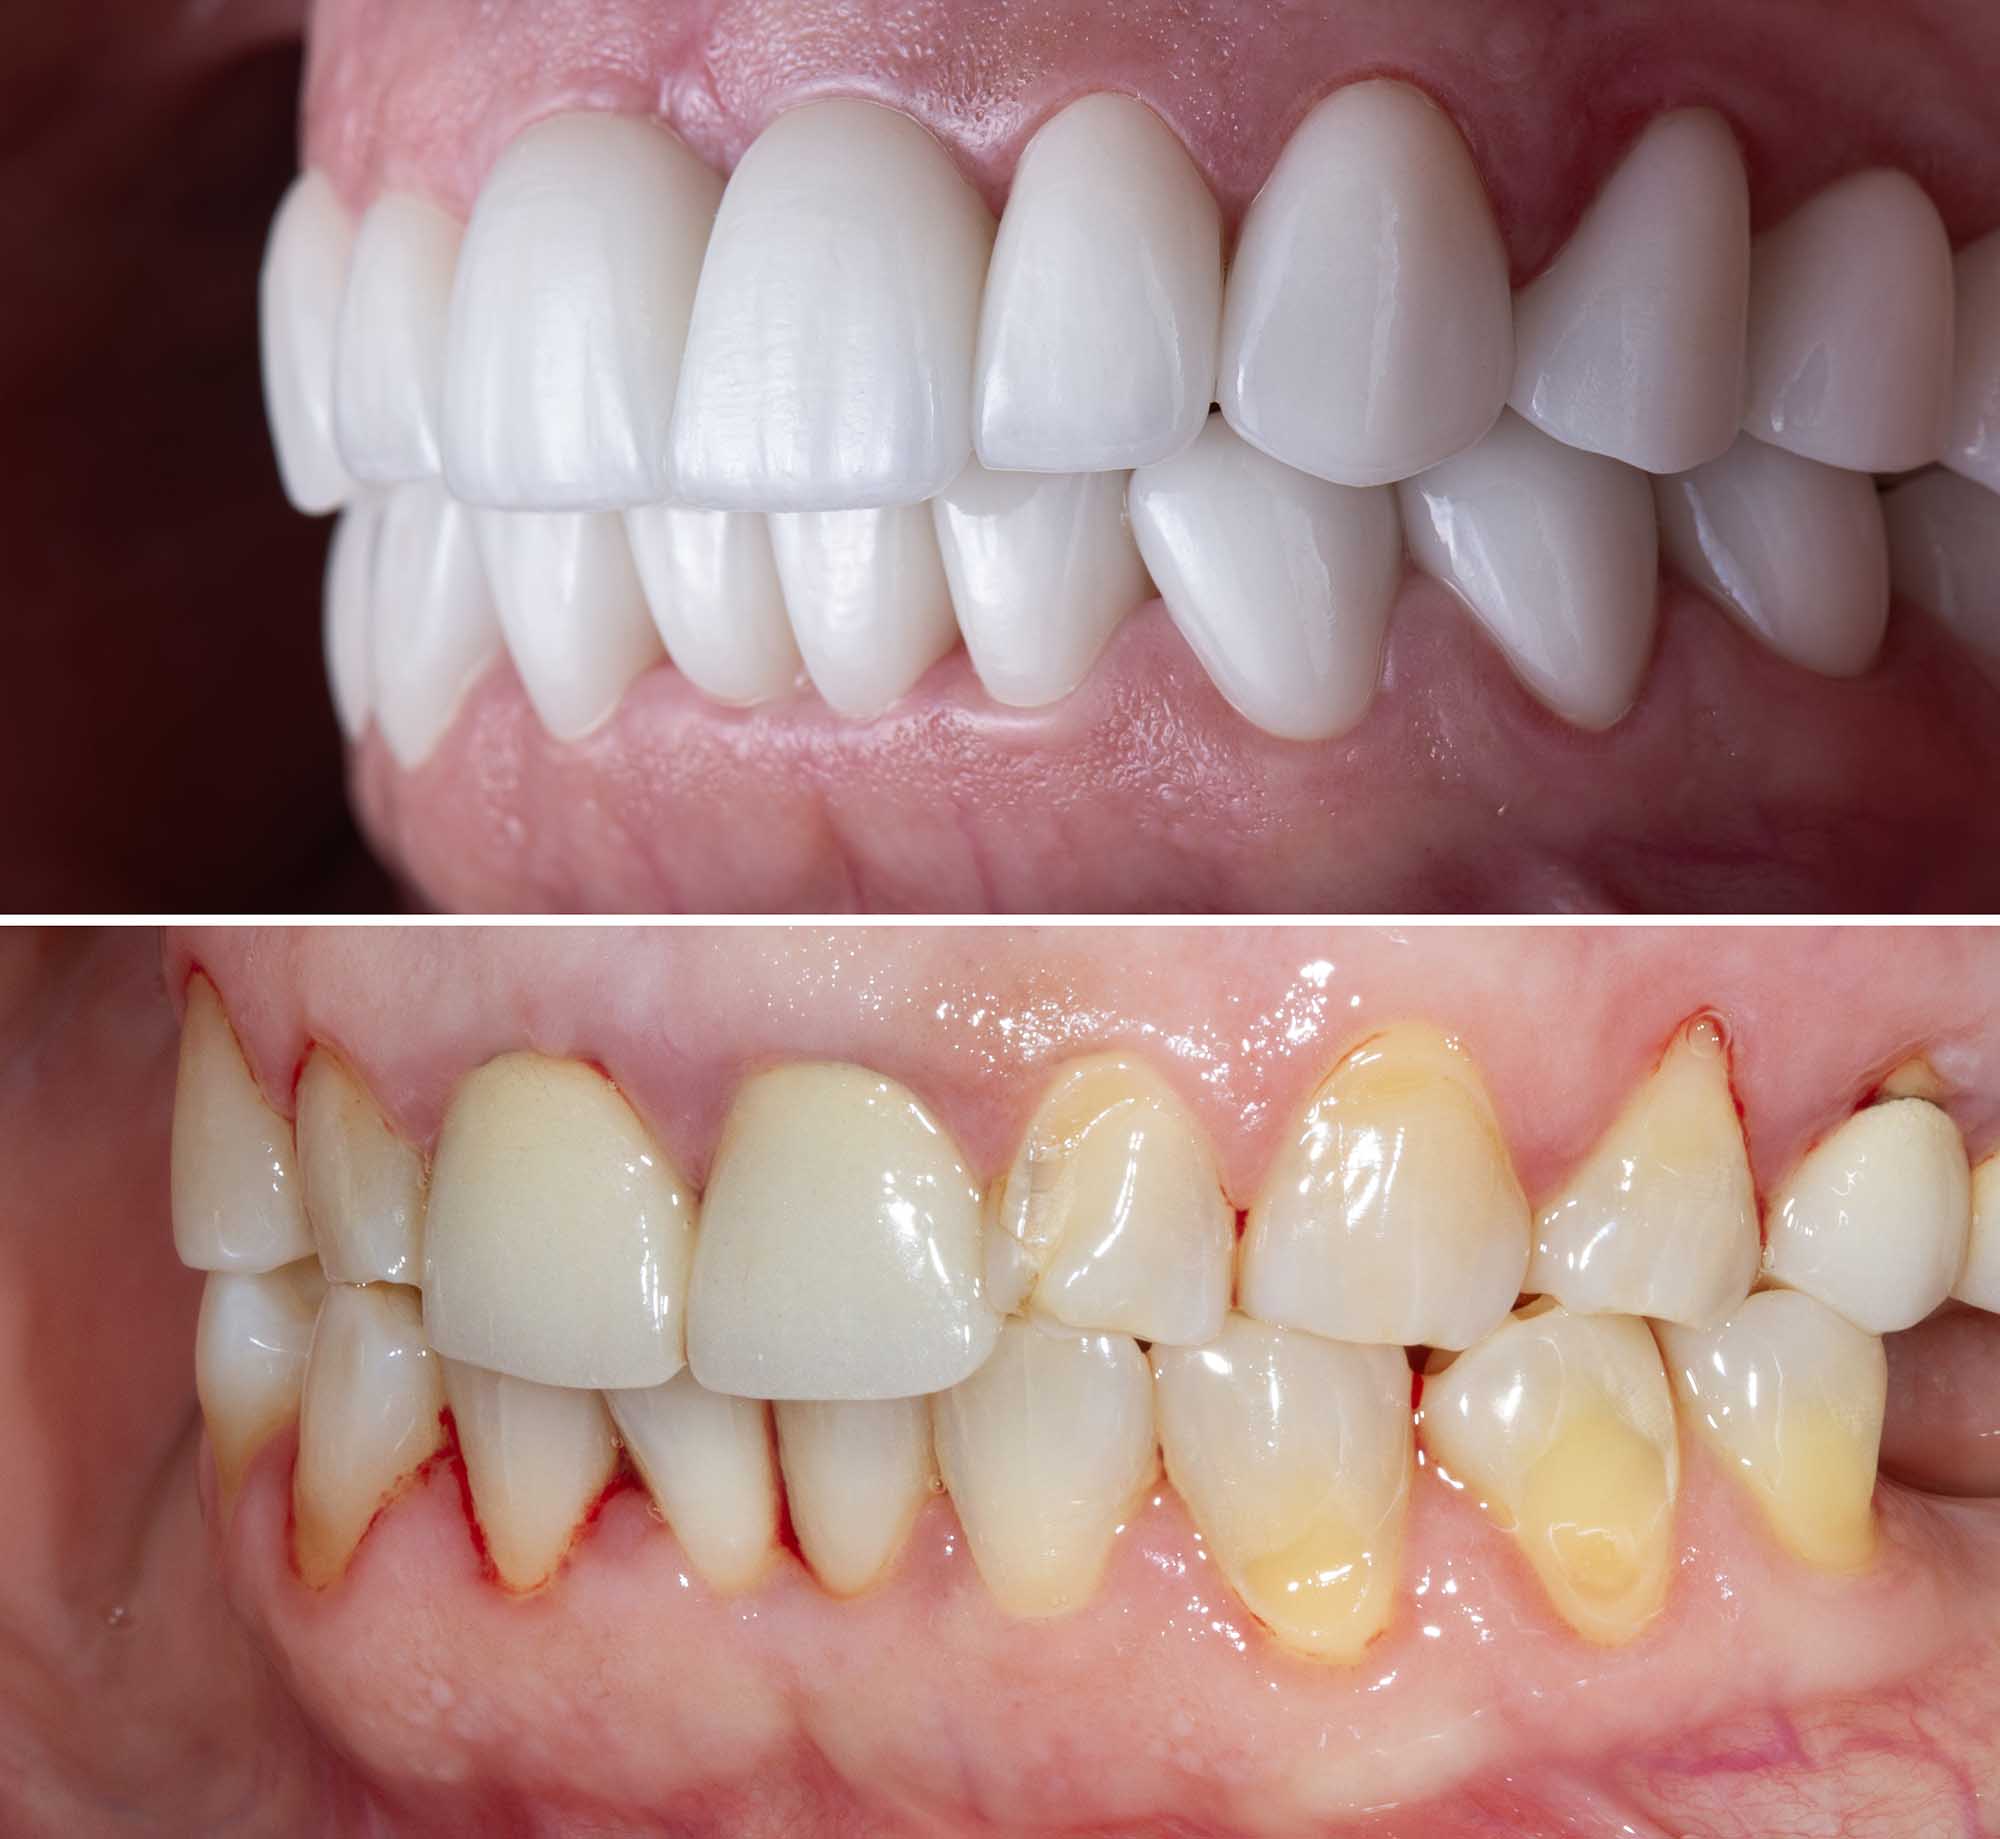 Who Is a Good Candidate for Composite Veneers?